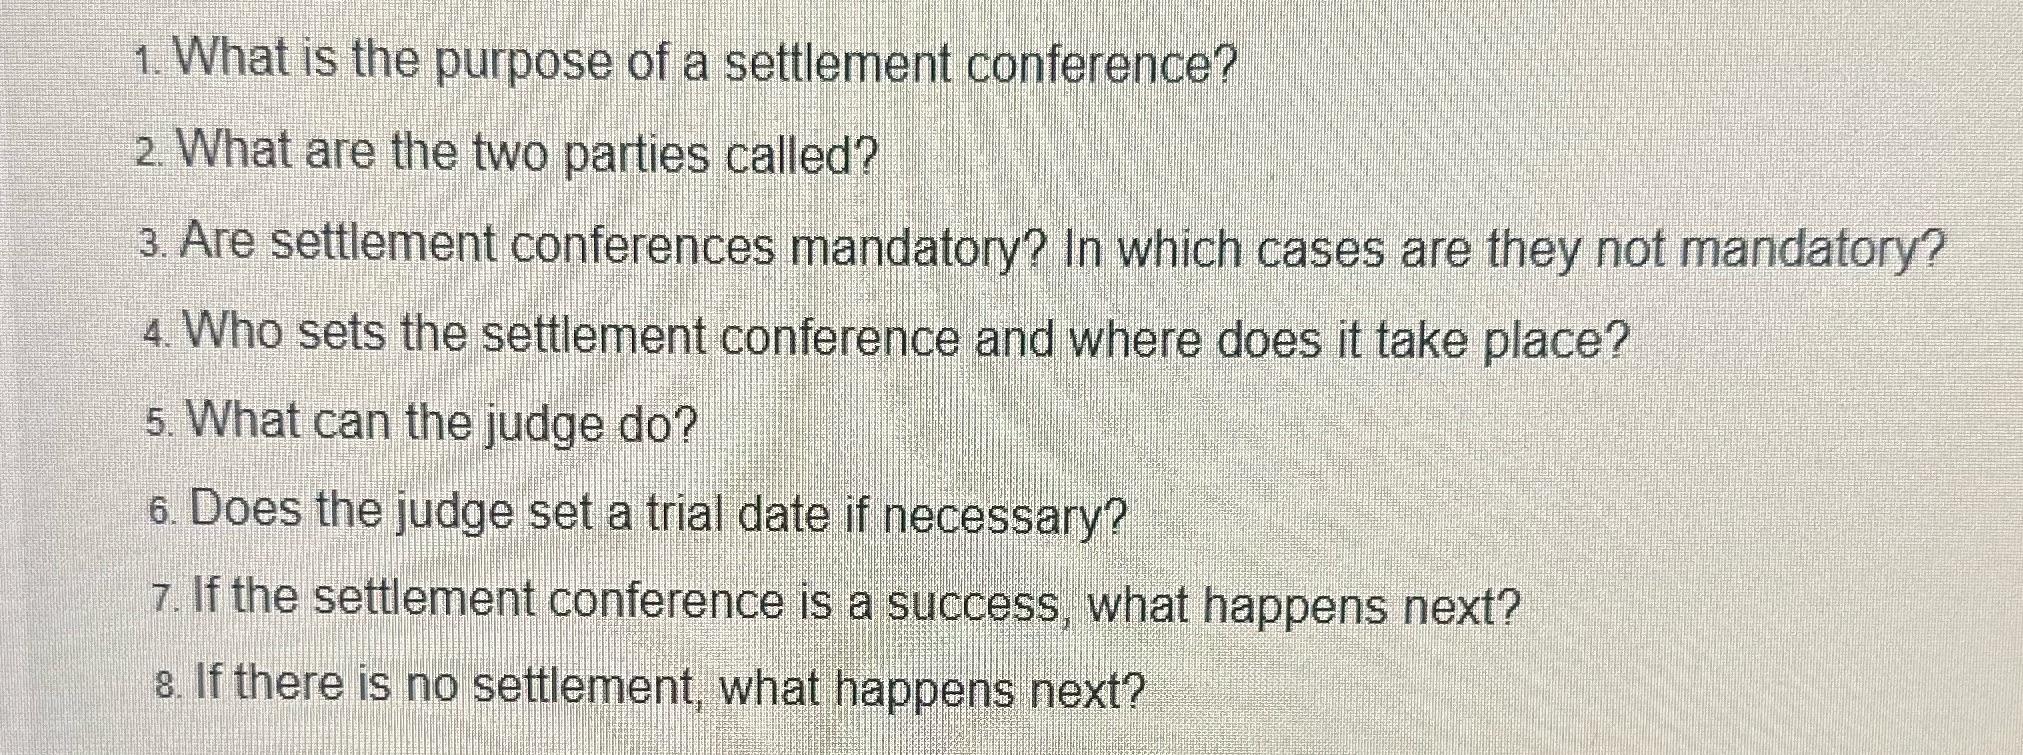 1. What is the purpose of a settlement conference? 2. What are the two parties called? 3. Are settlement